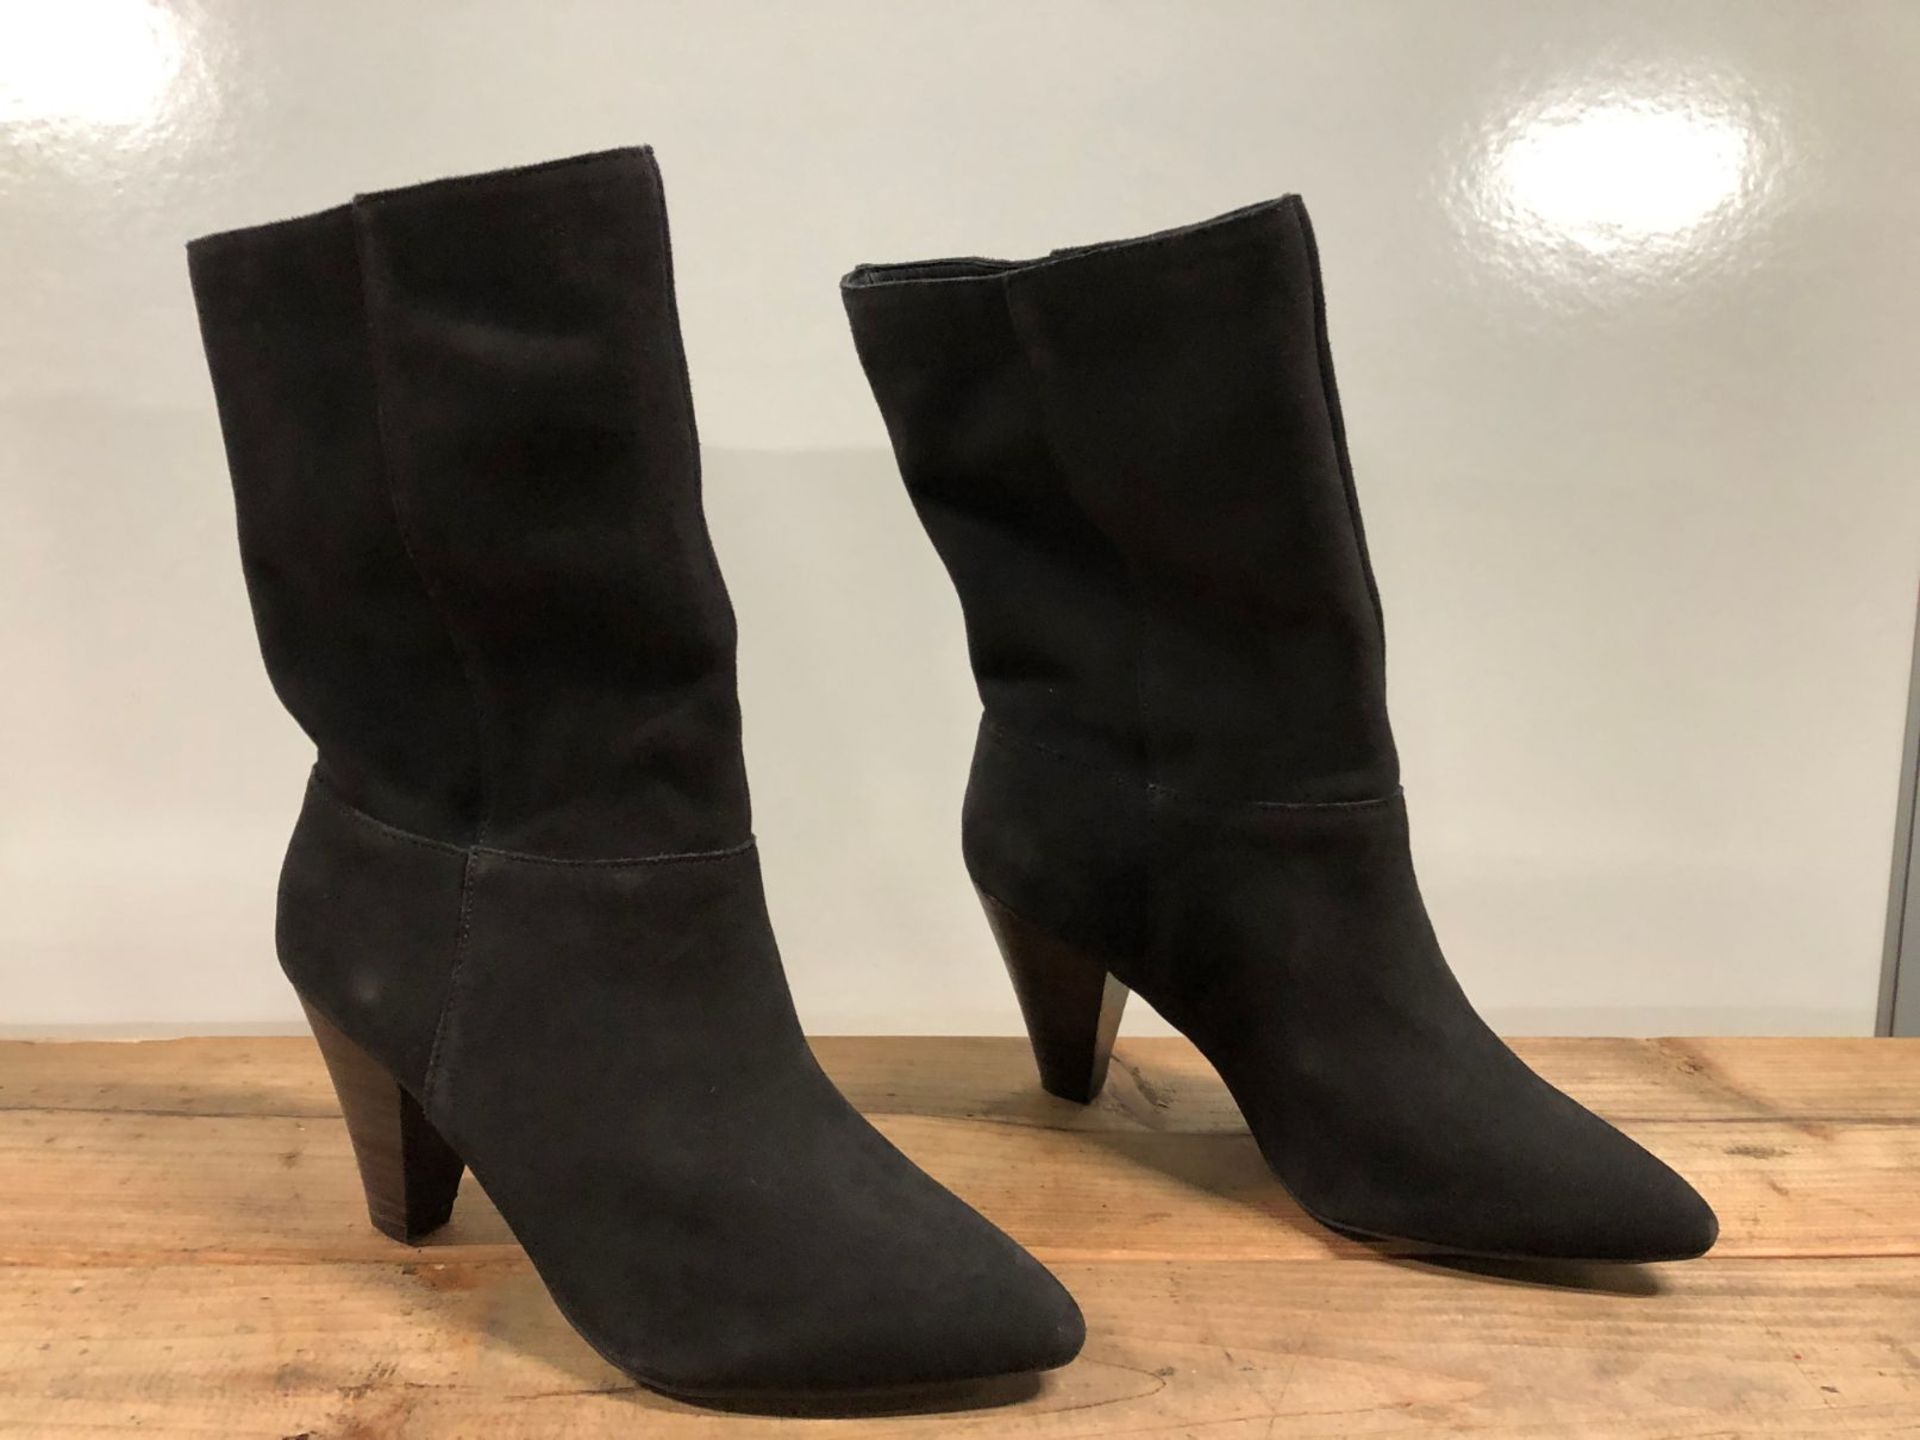 1 X PAIR OF LA REDOUTE COLLECTIONS SUEDE BOOTS / SIZE: 5.75 UK